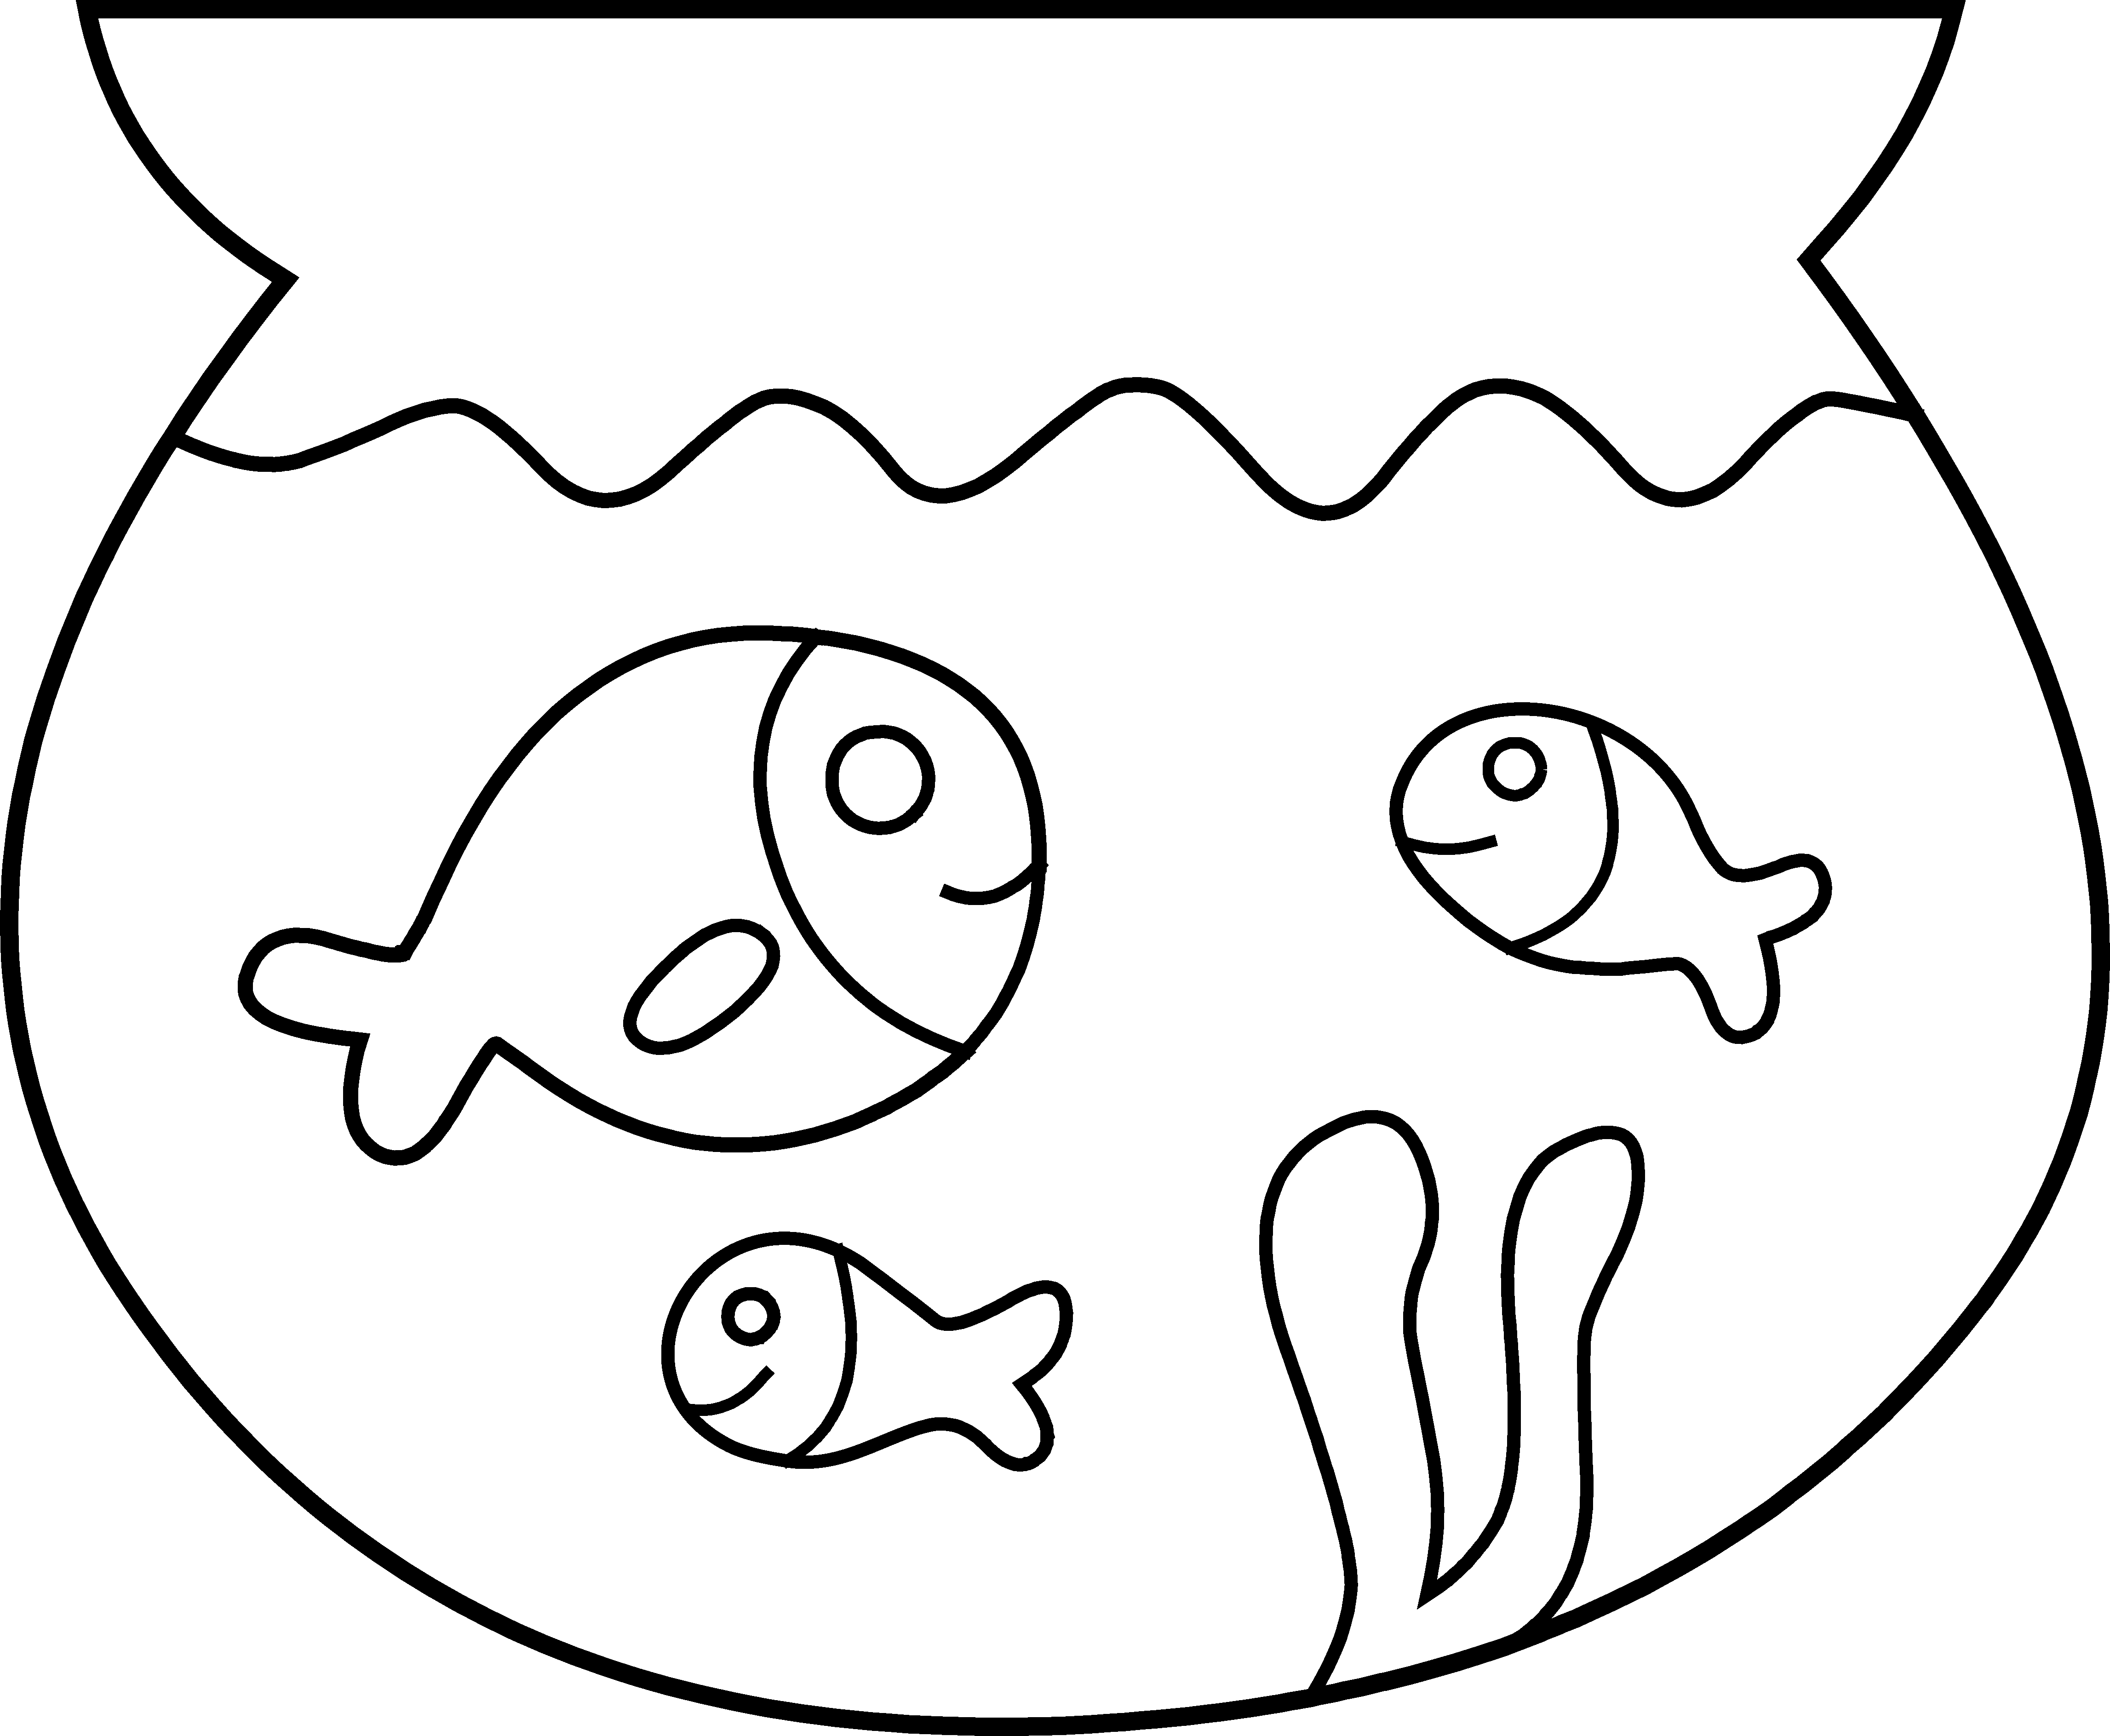 Fish clipart easy, Fish easy Transparent FREE for download ...